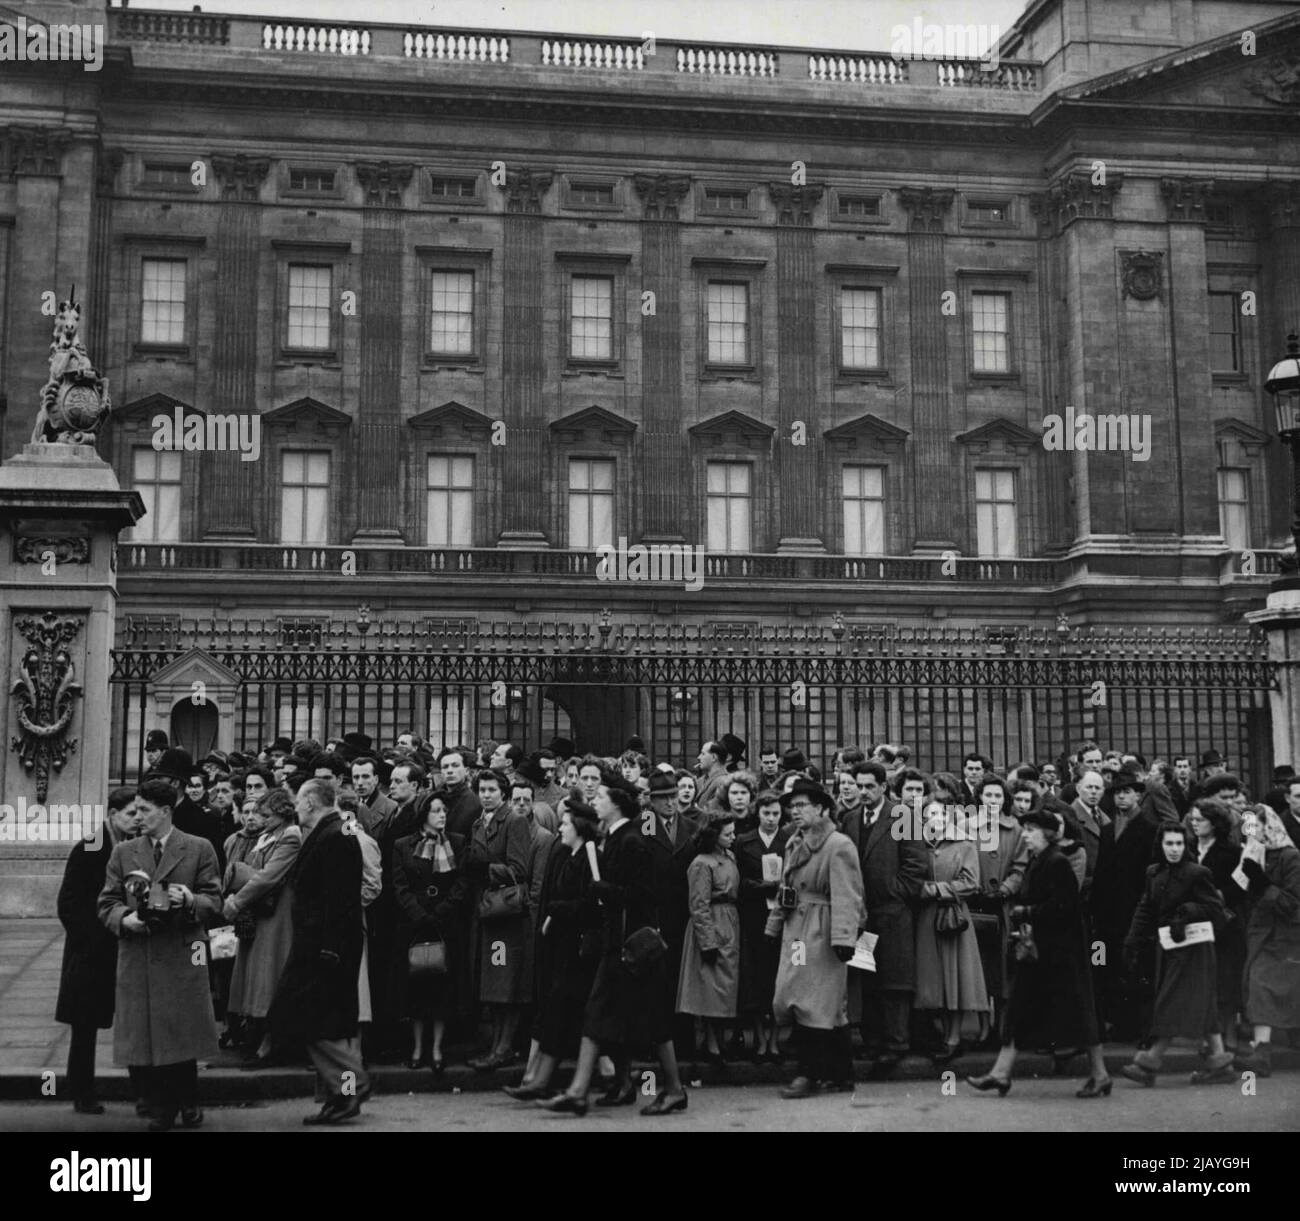 Blinds Drawn At Palace - The blinds in the windows of Buckingham Palace, London, are drawn this morning, February 6, following the death of the king early today. Mourning crowds wait outside the gates. February 06, 1952. (Photo by Associated Press Photo). Stock Photo